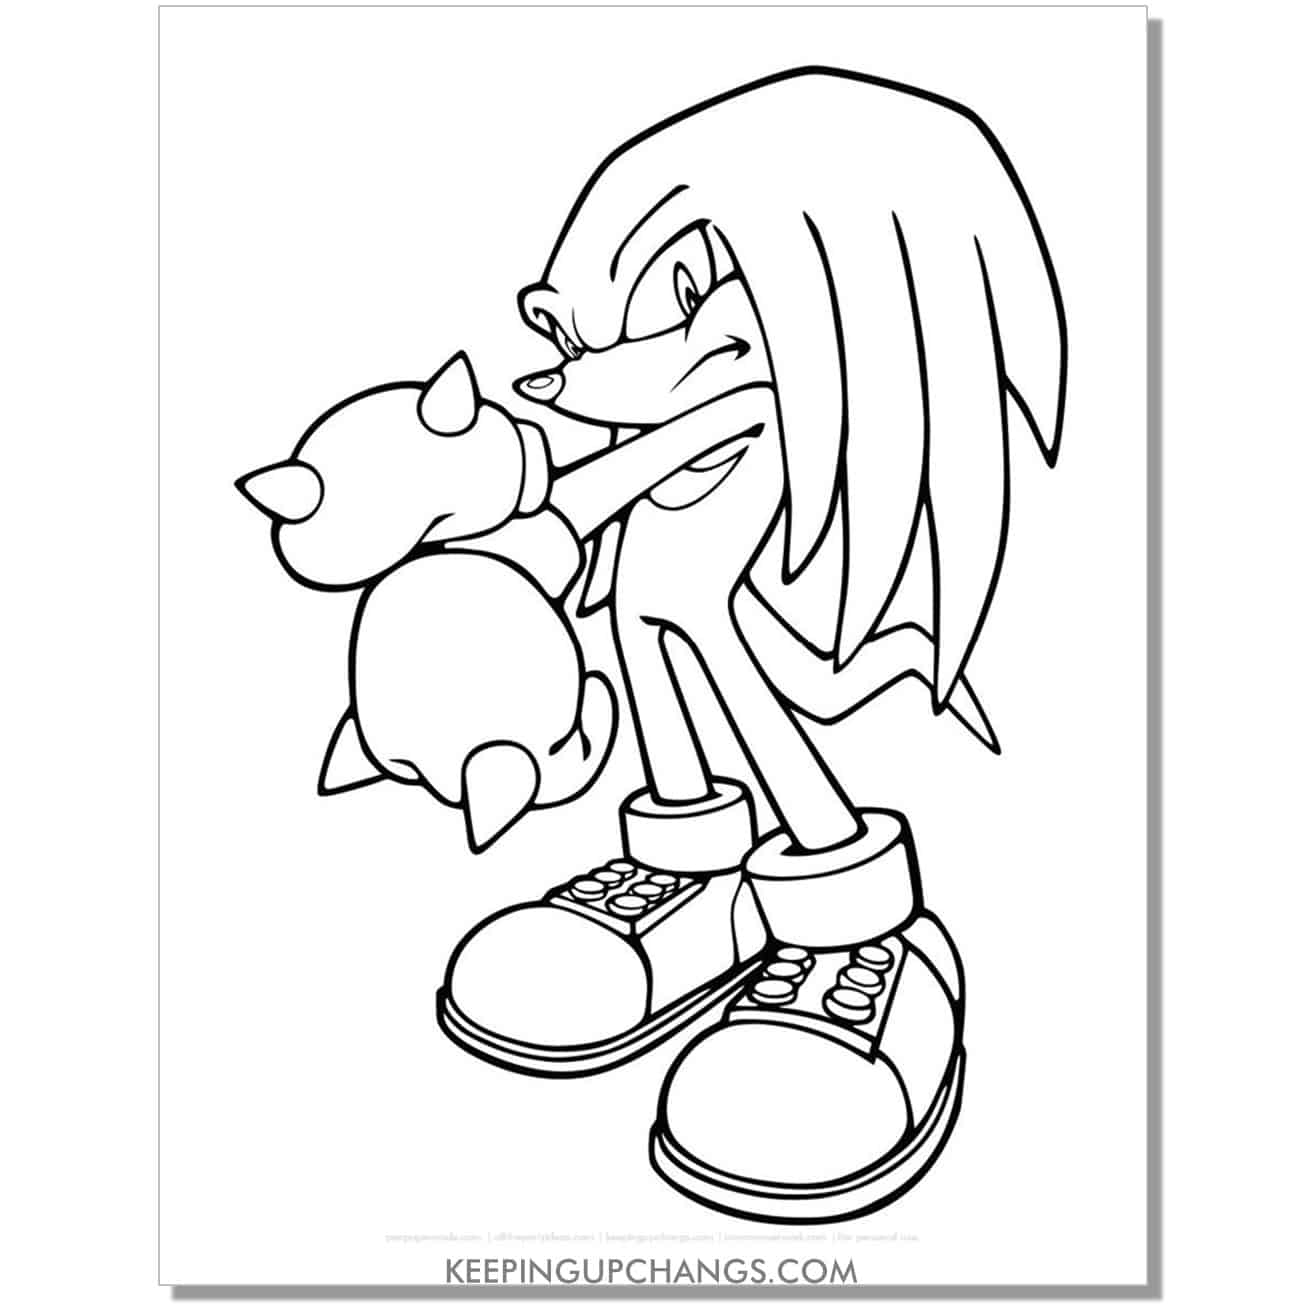 knuckles with fists crossed in front sonic coloring page.